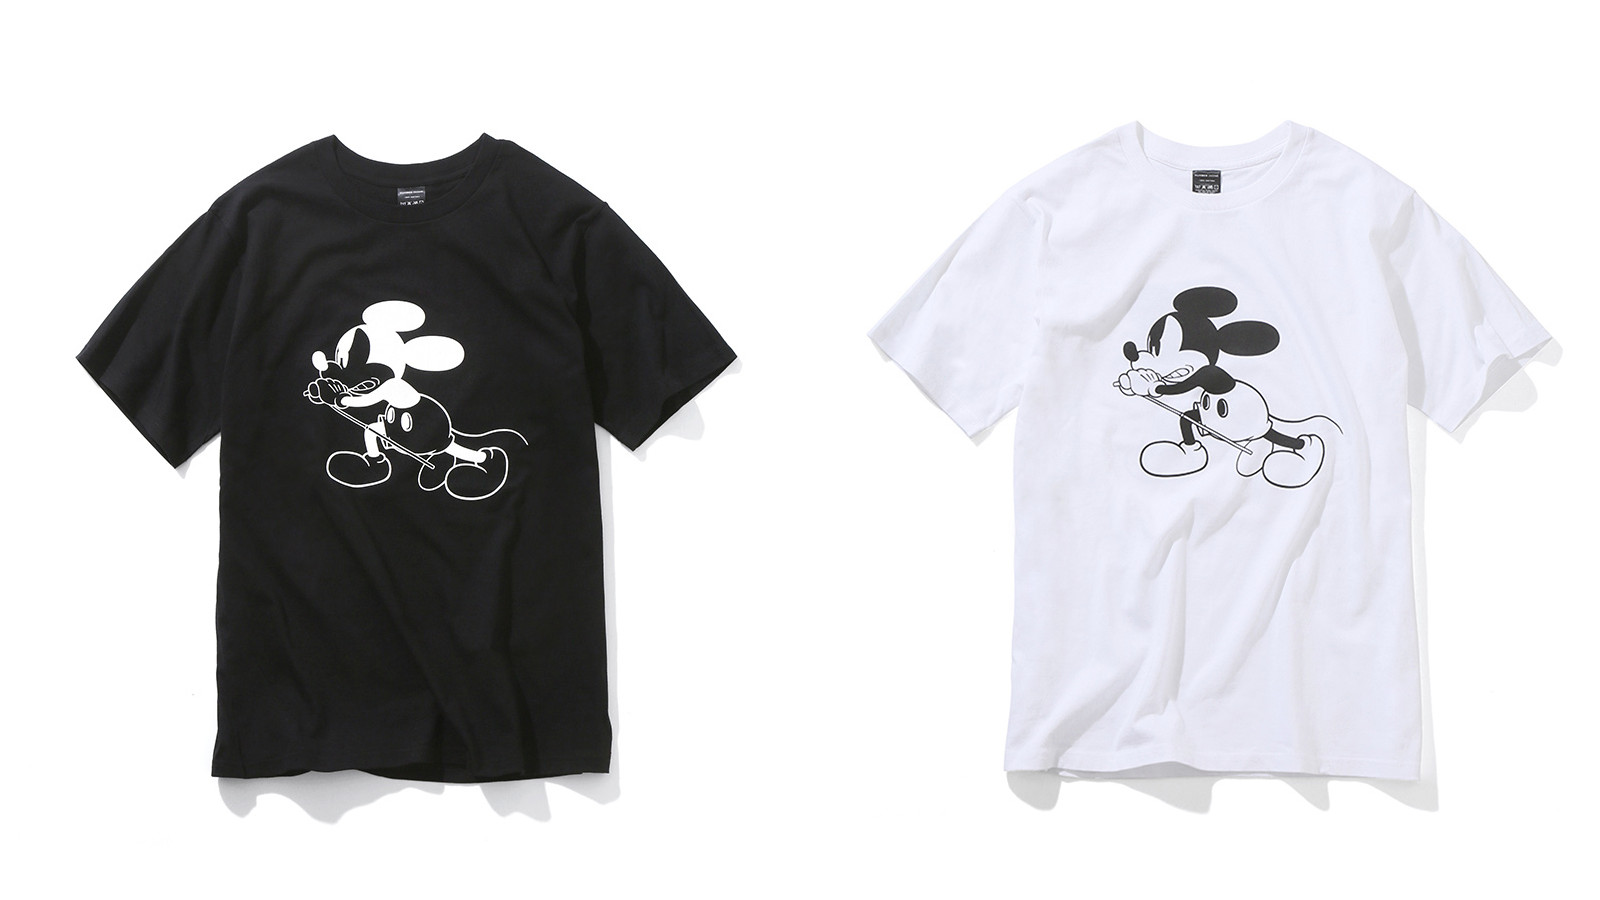 Number N(ine) teams up with Disney once again for spring/summer 17